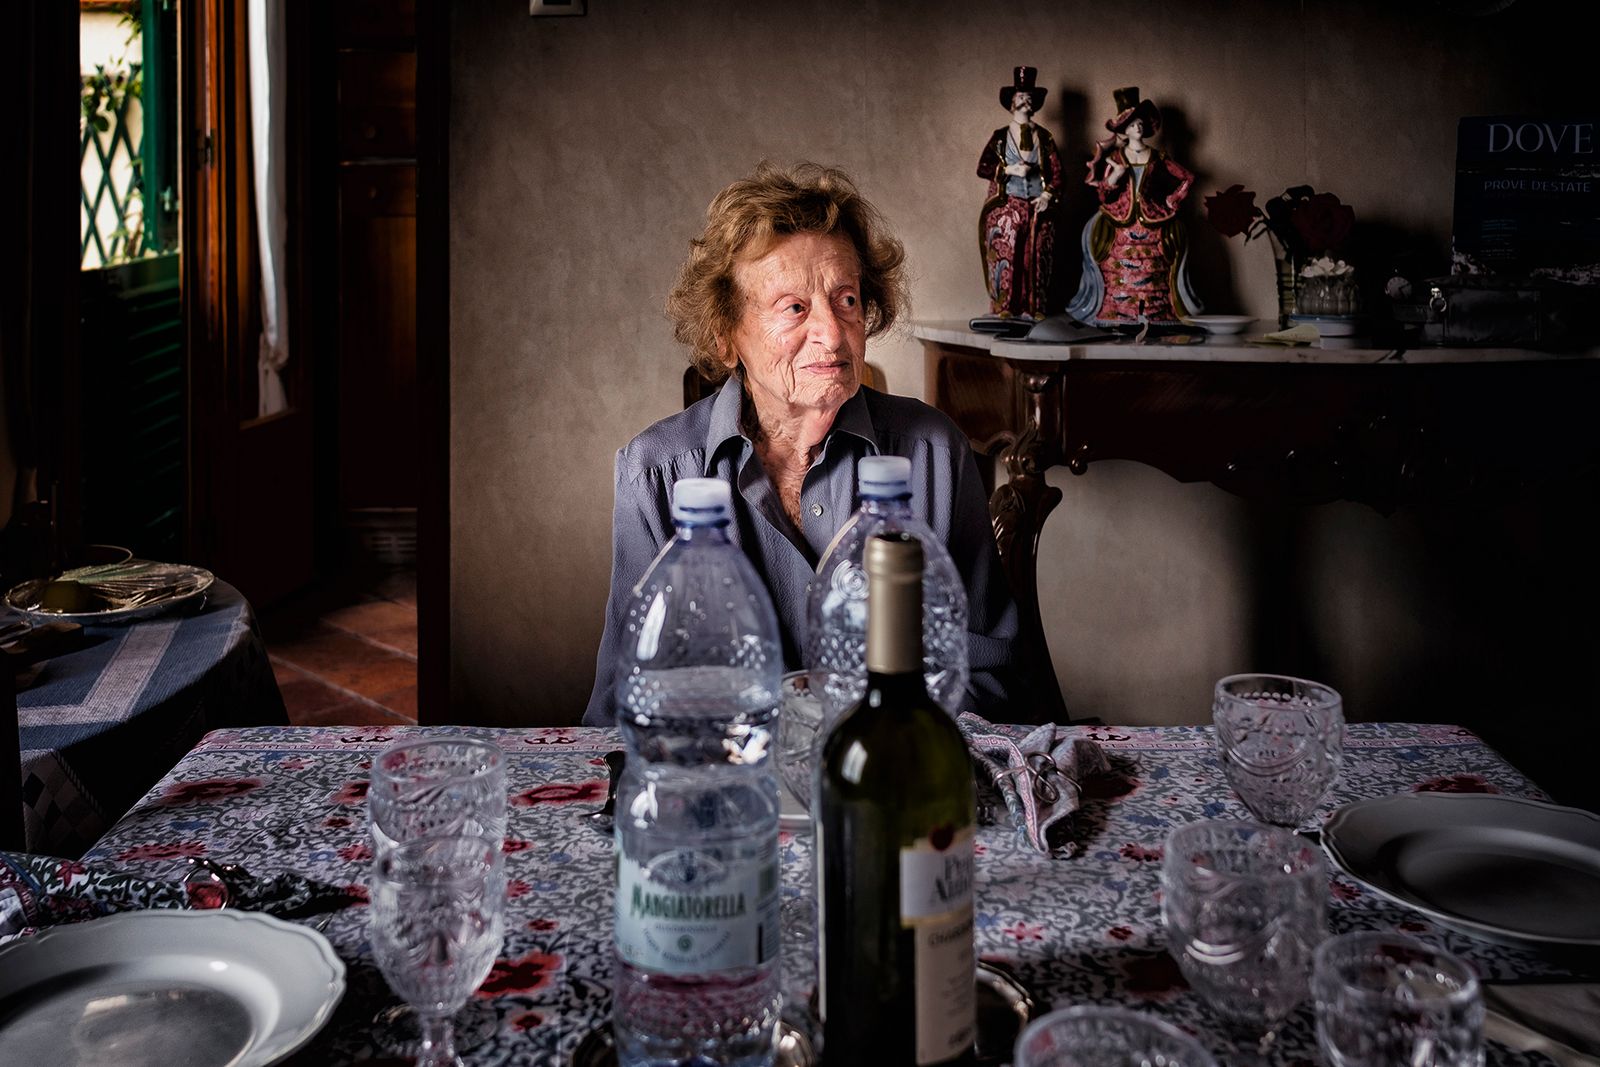 © Simona Bonanno - Aunt Sara sits on her table during a meal